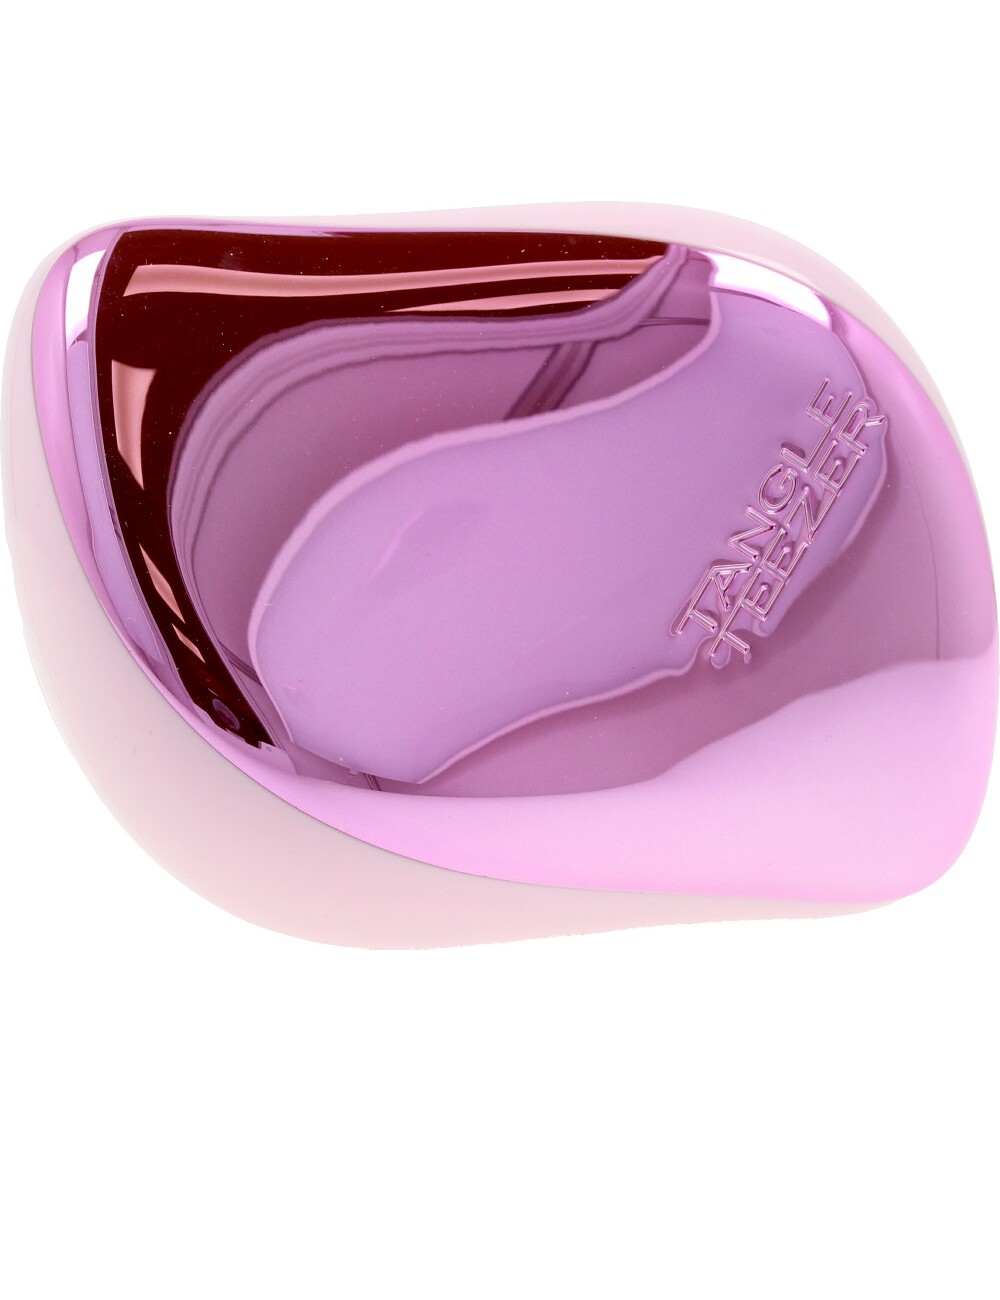 COMPACT STYLER limited edition Baby Doll Pink Chrome